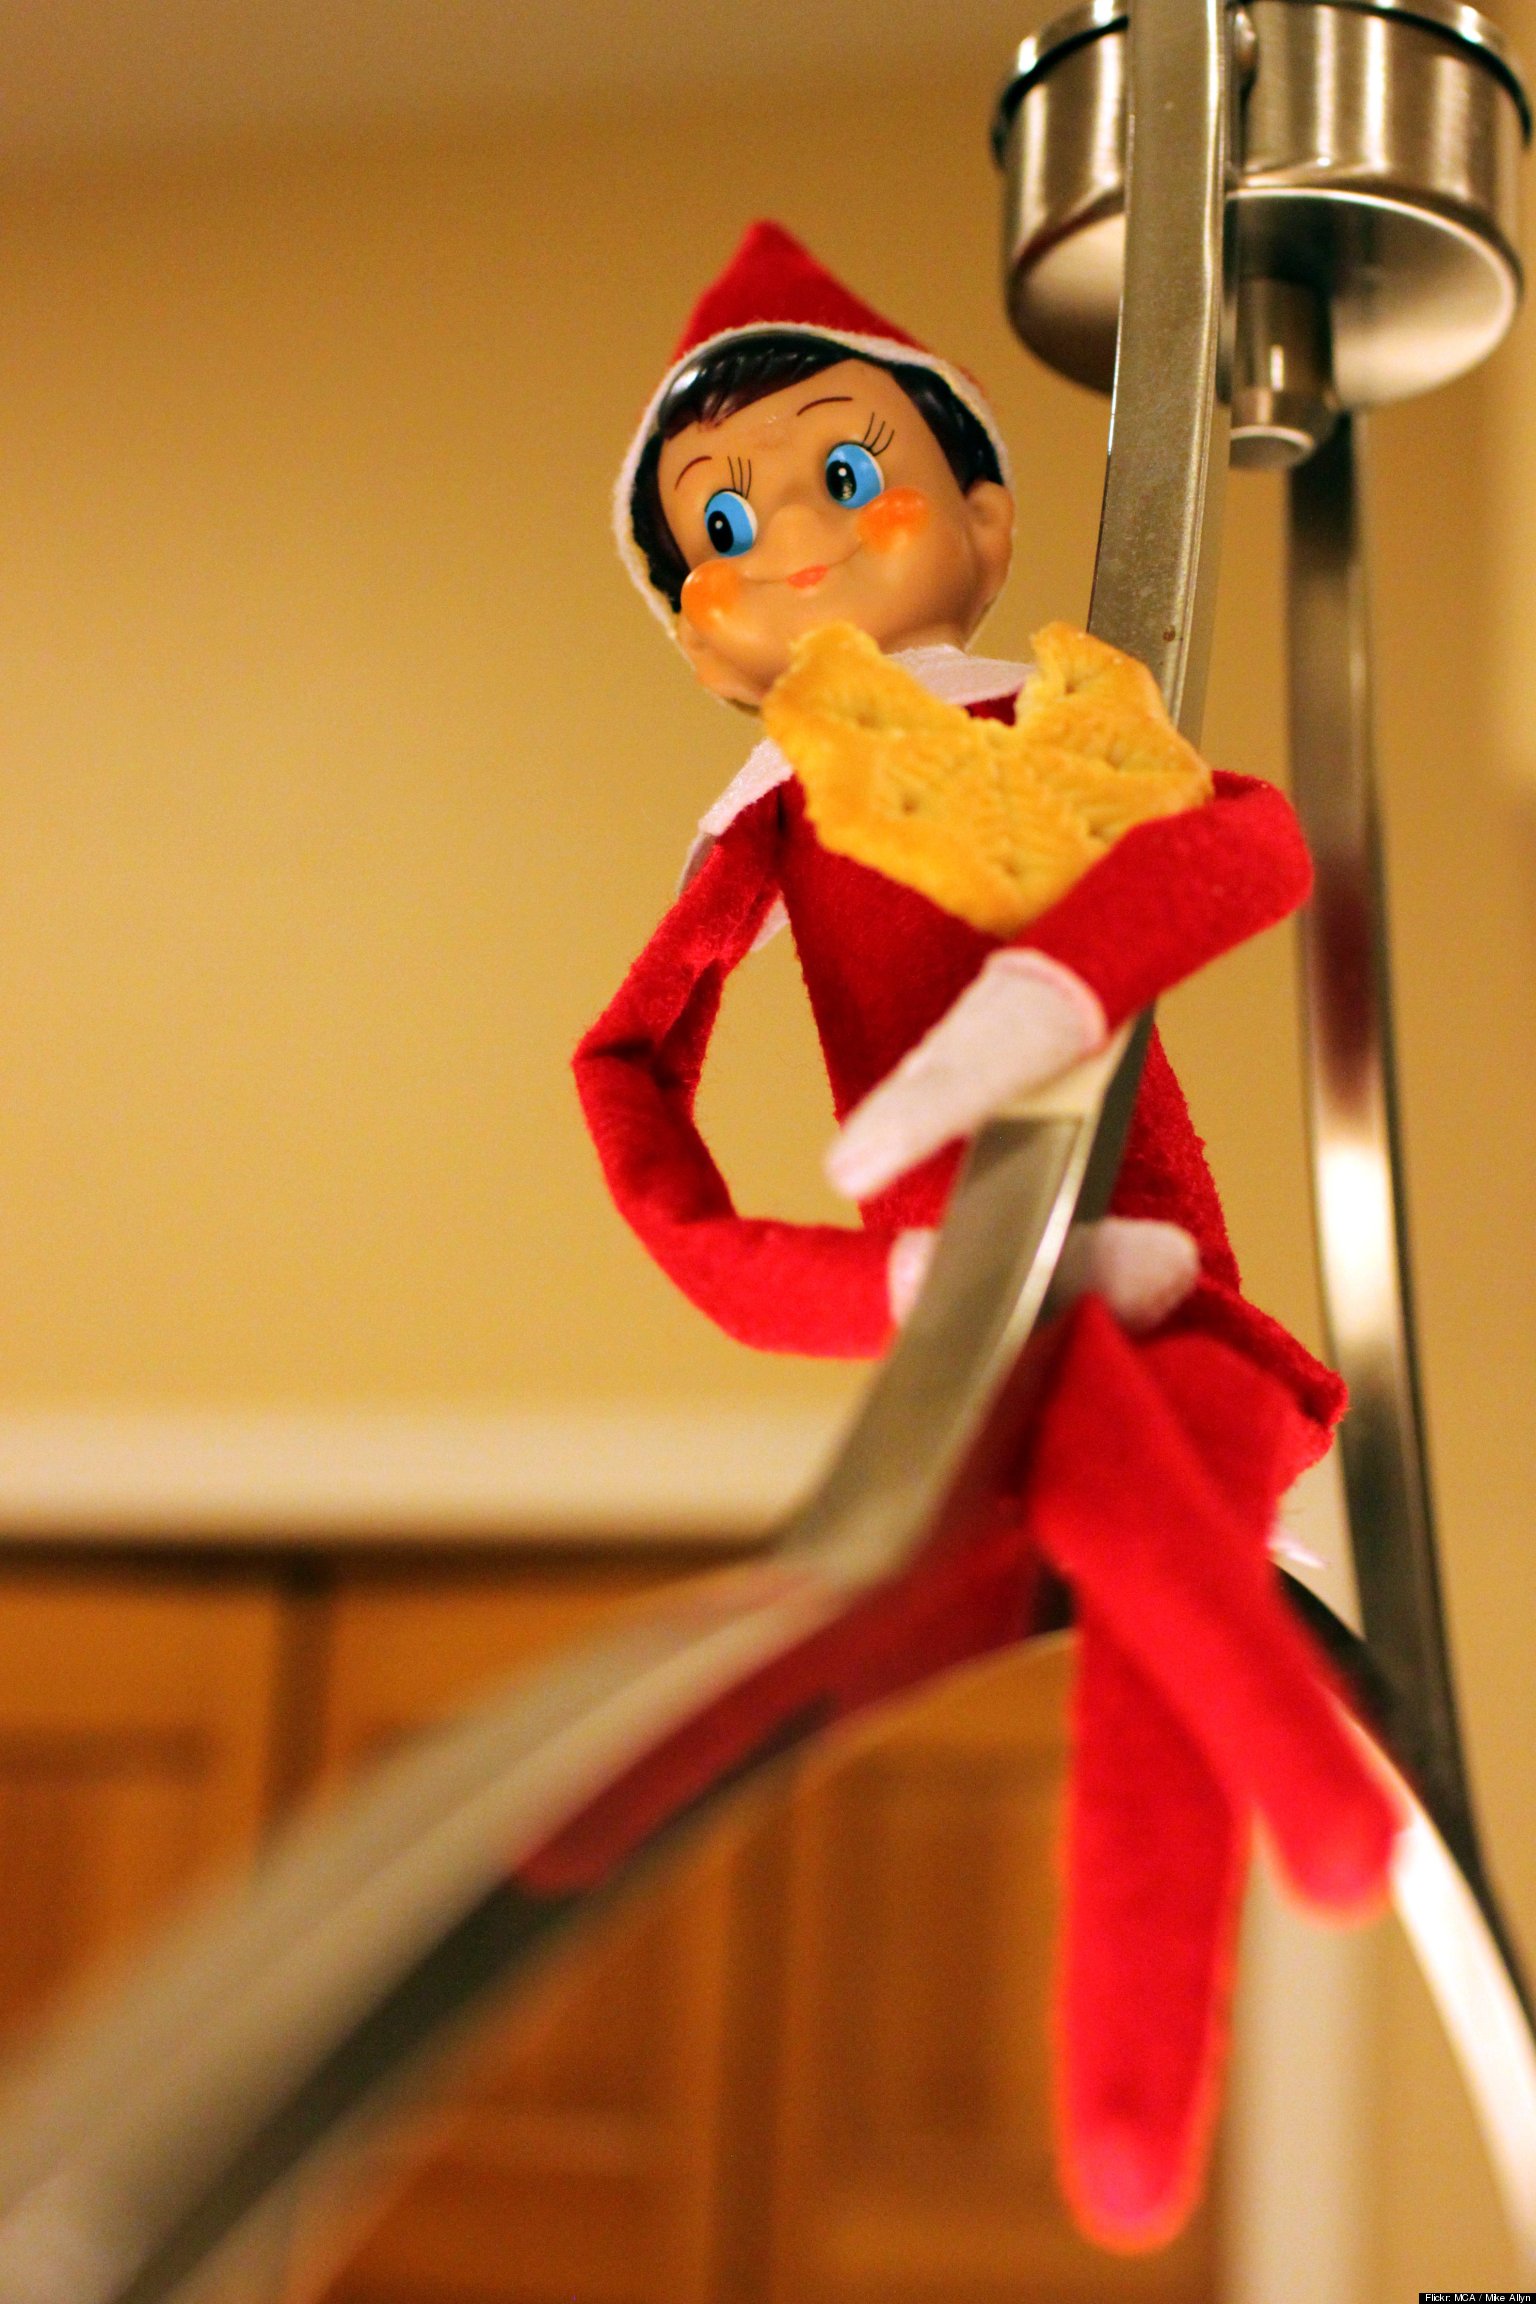 The Elf Went for a Drink | Abbie Rumbach